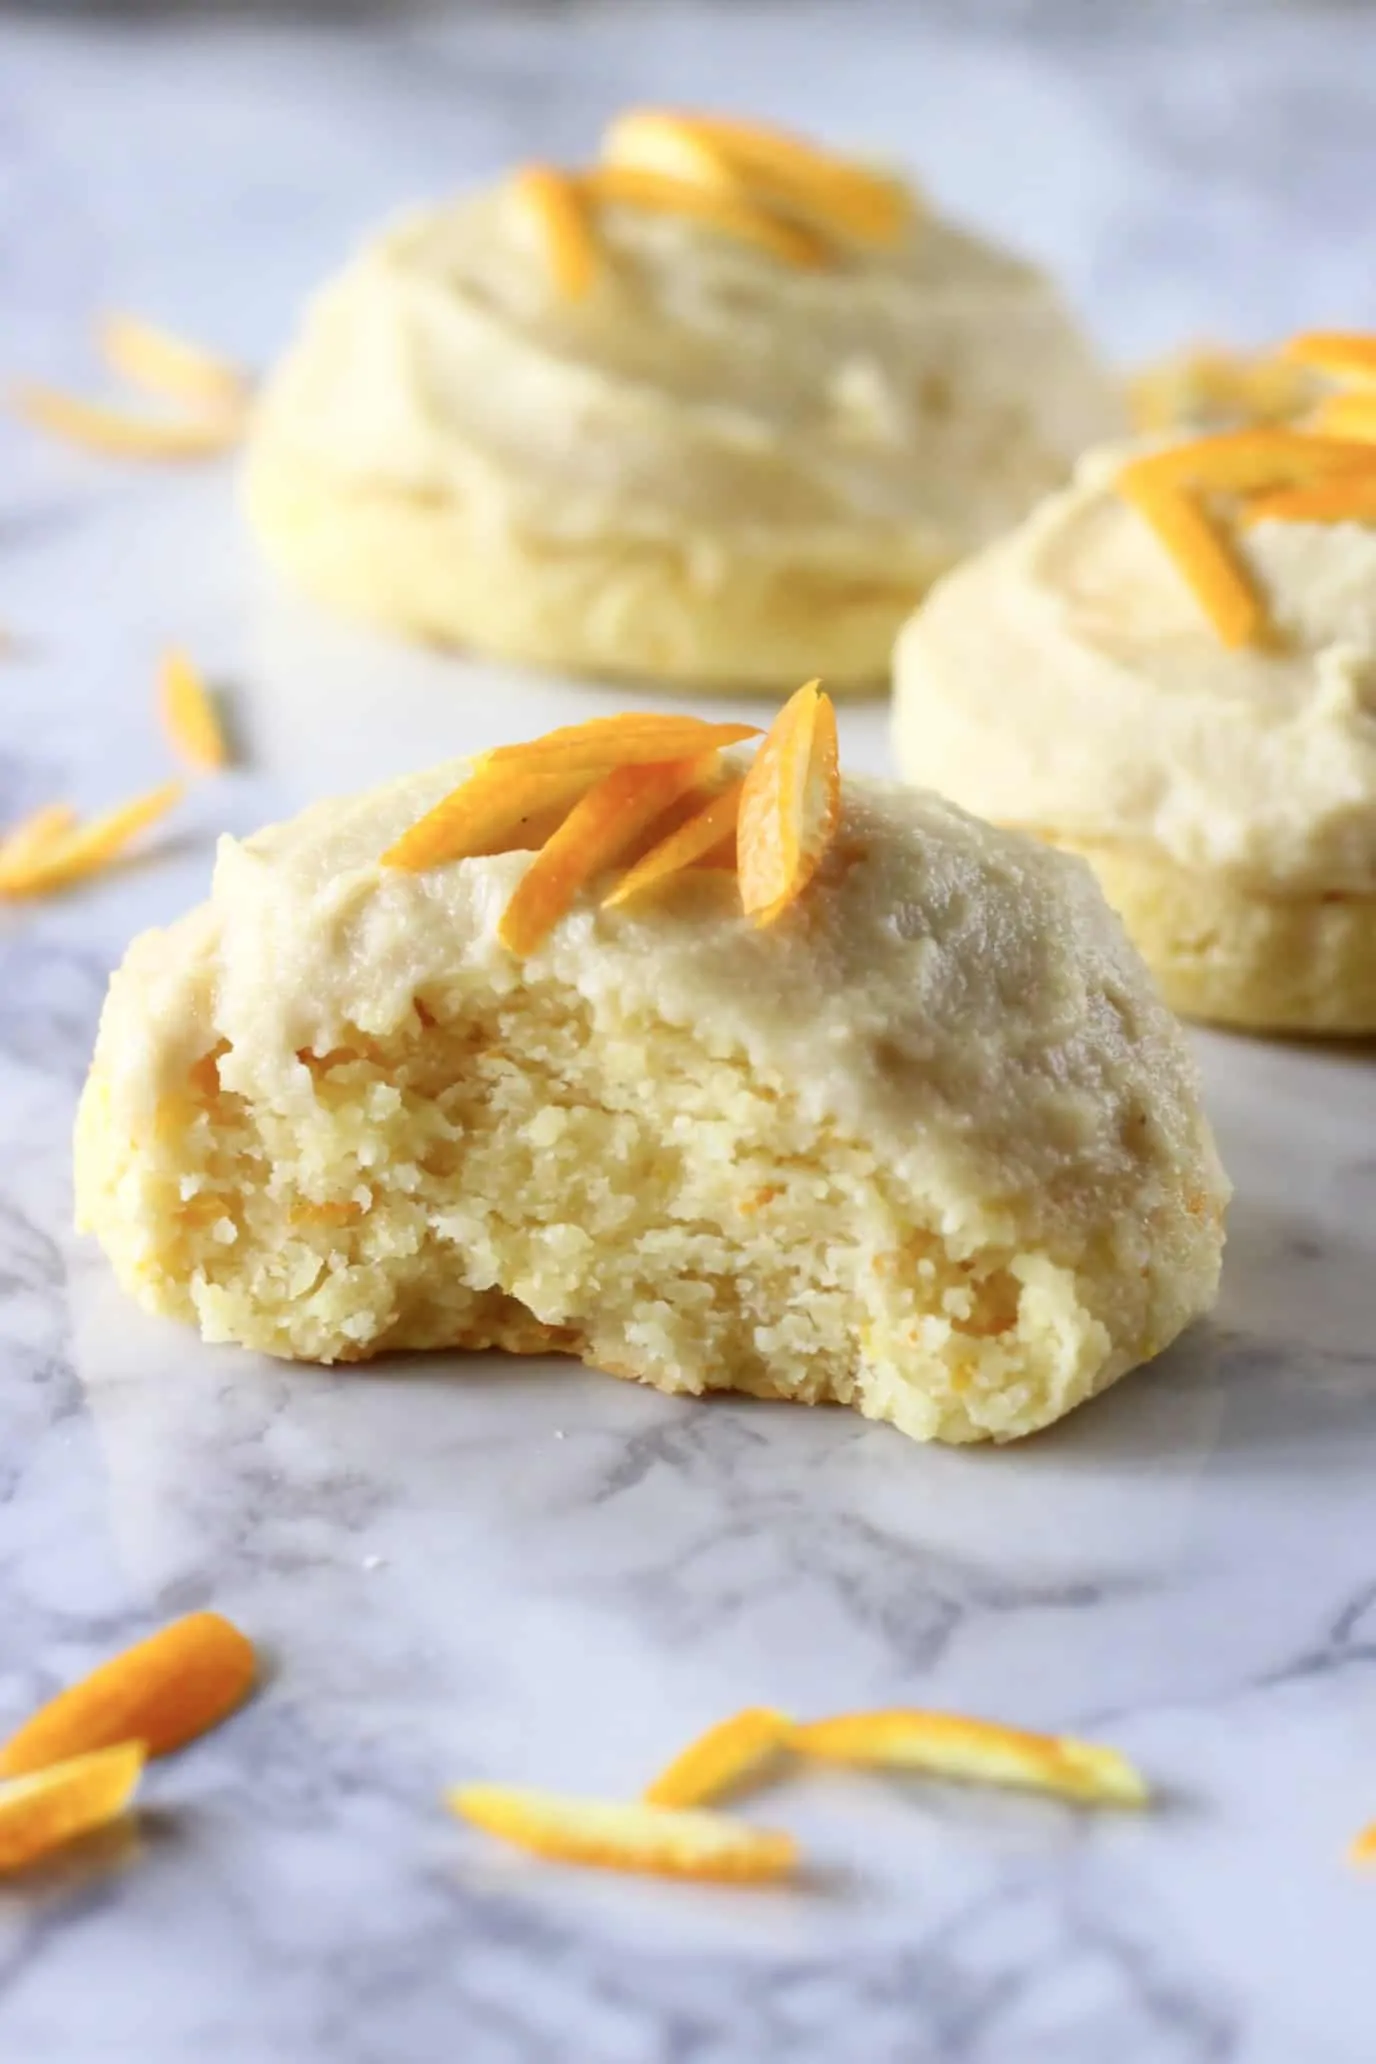 Three gluten-free vegan orange cookies with frosting and orange zest with a bite taken out of one